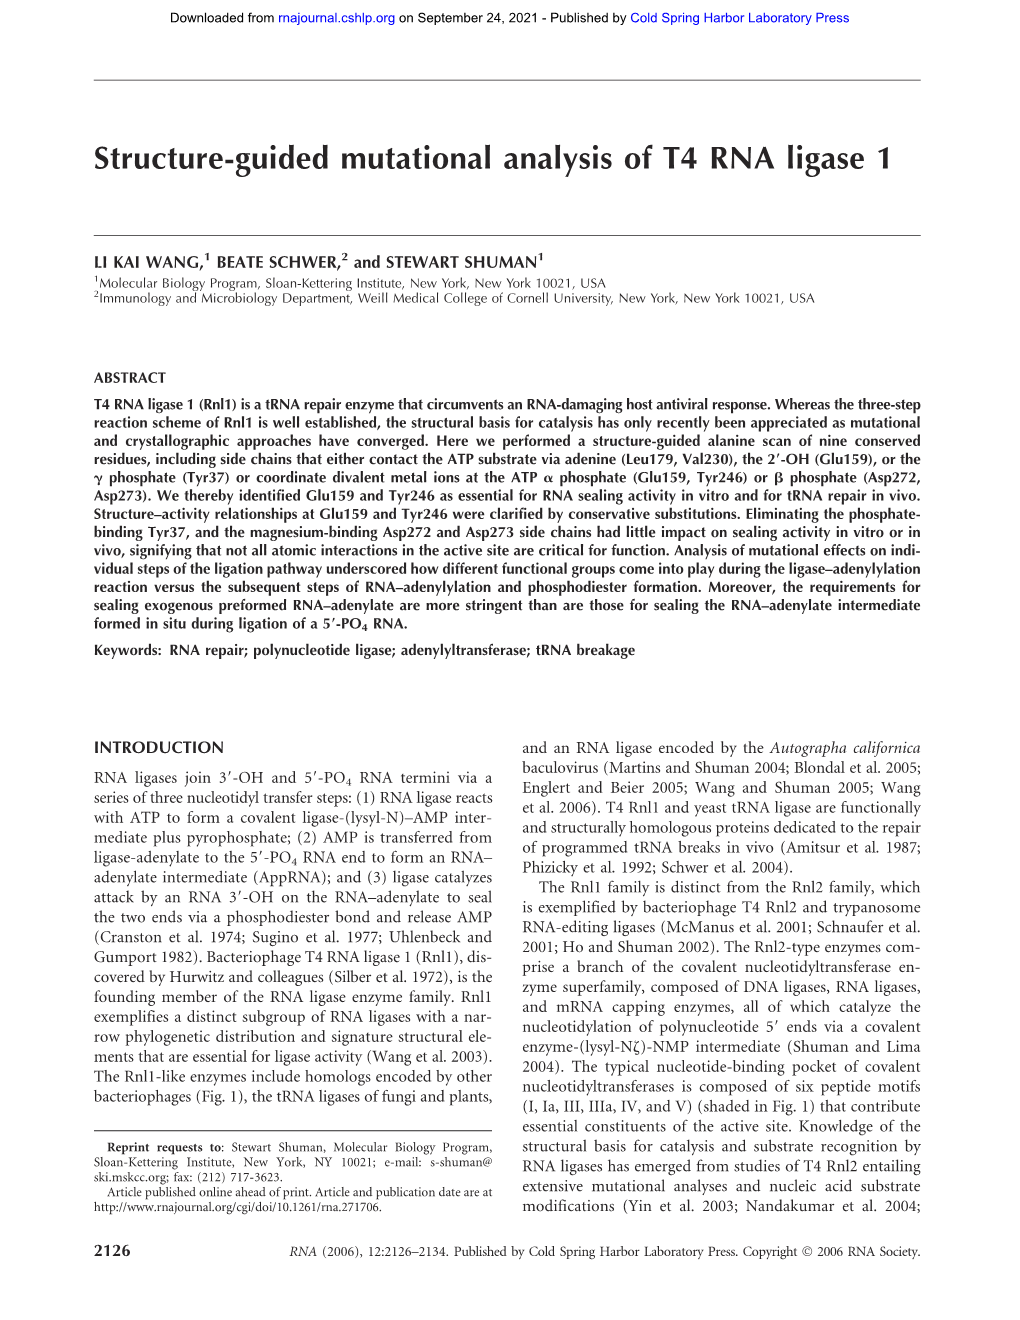 Structure-Guided Mutational Analysis of T4 RNA Ligase 1